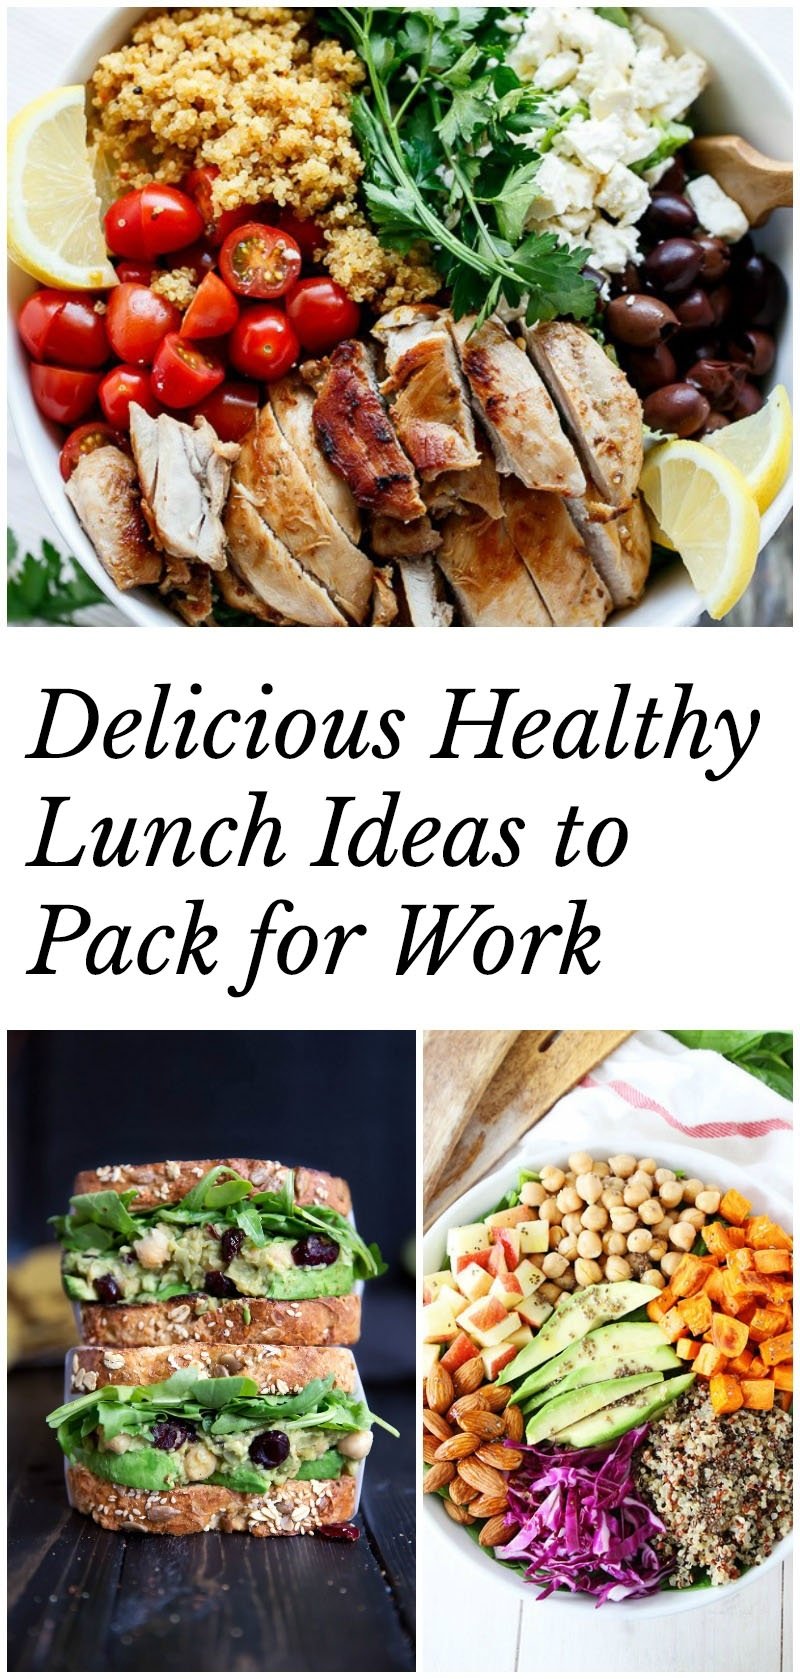 10 Elegant Quick Easy Lunch Ideas For Work healthy lunch ideas to pack for work 40 recipes 29 2022